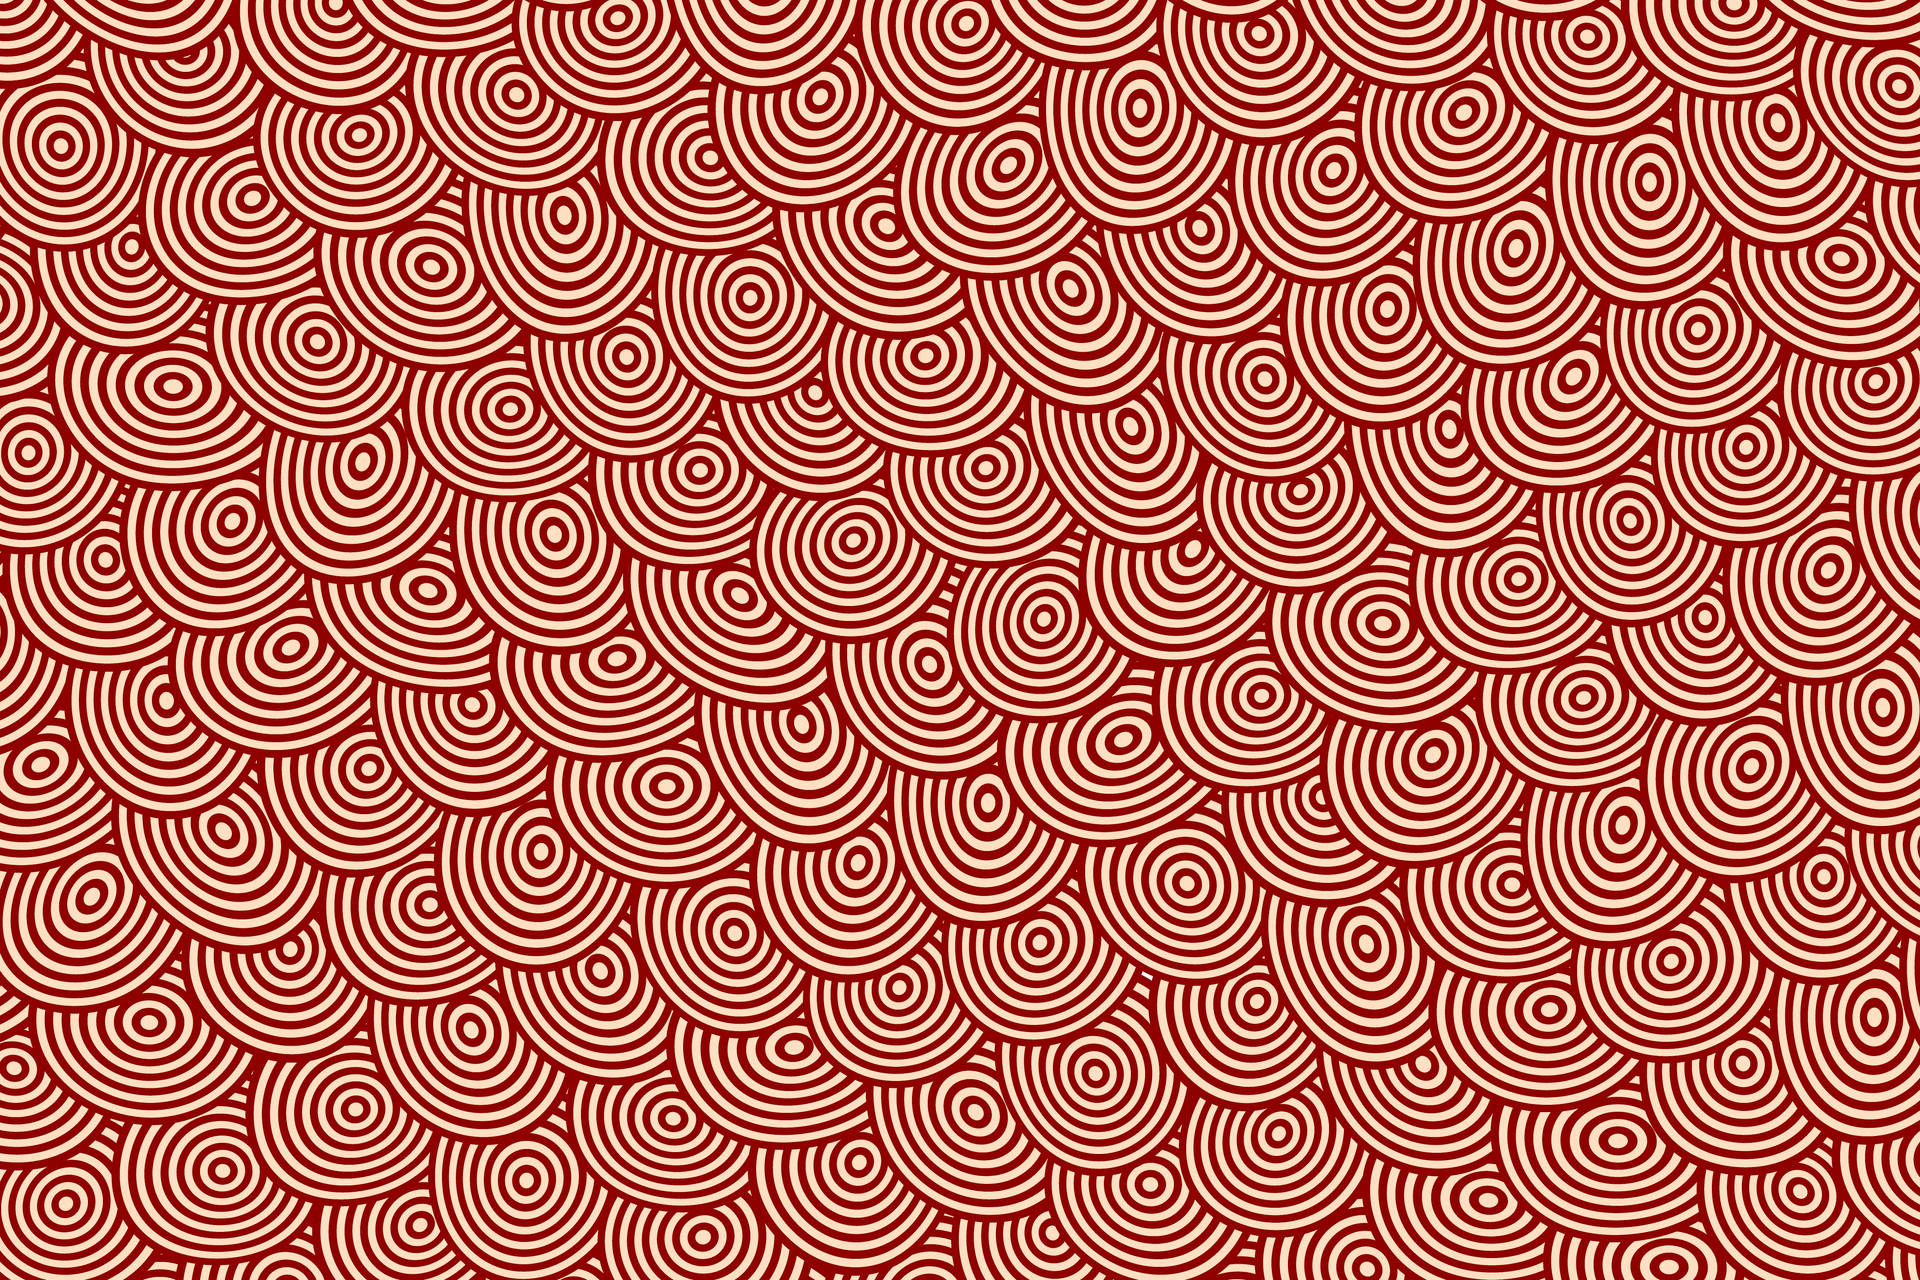 Textured Trippy Curves Wallpaper